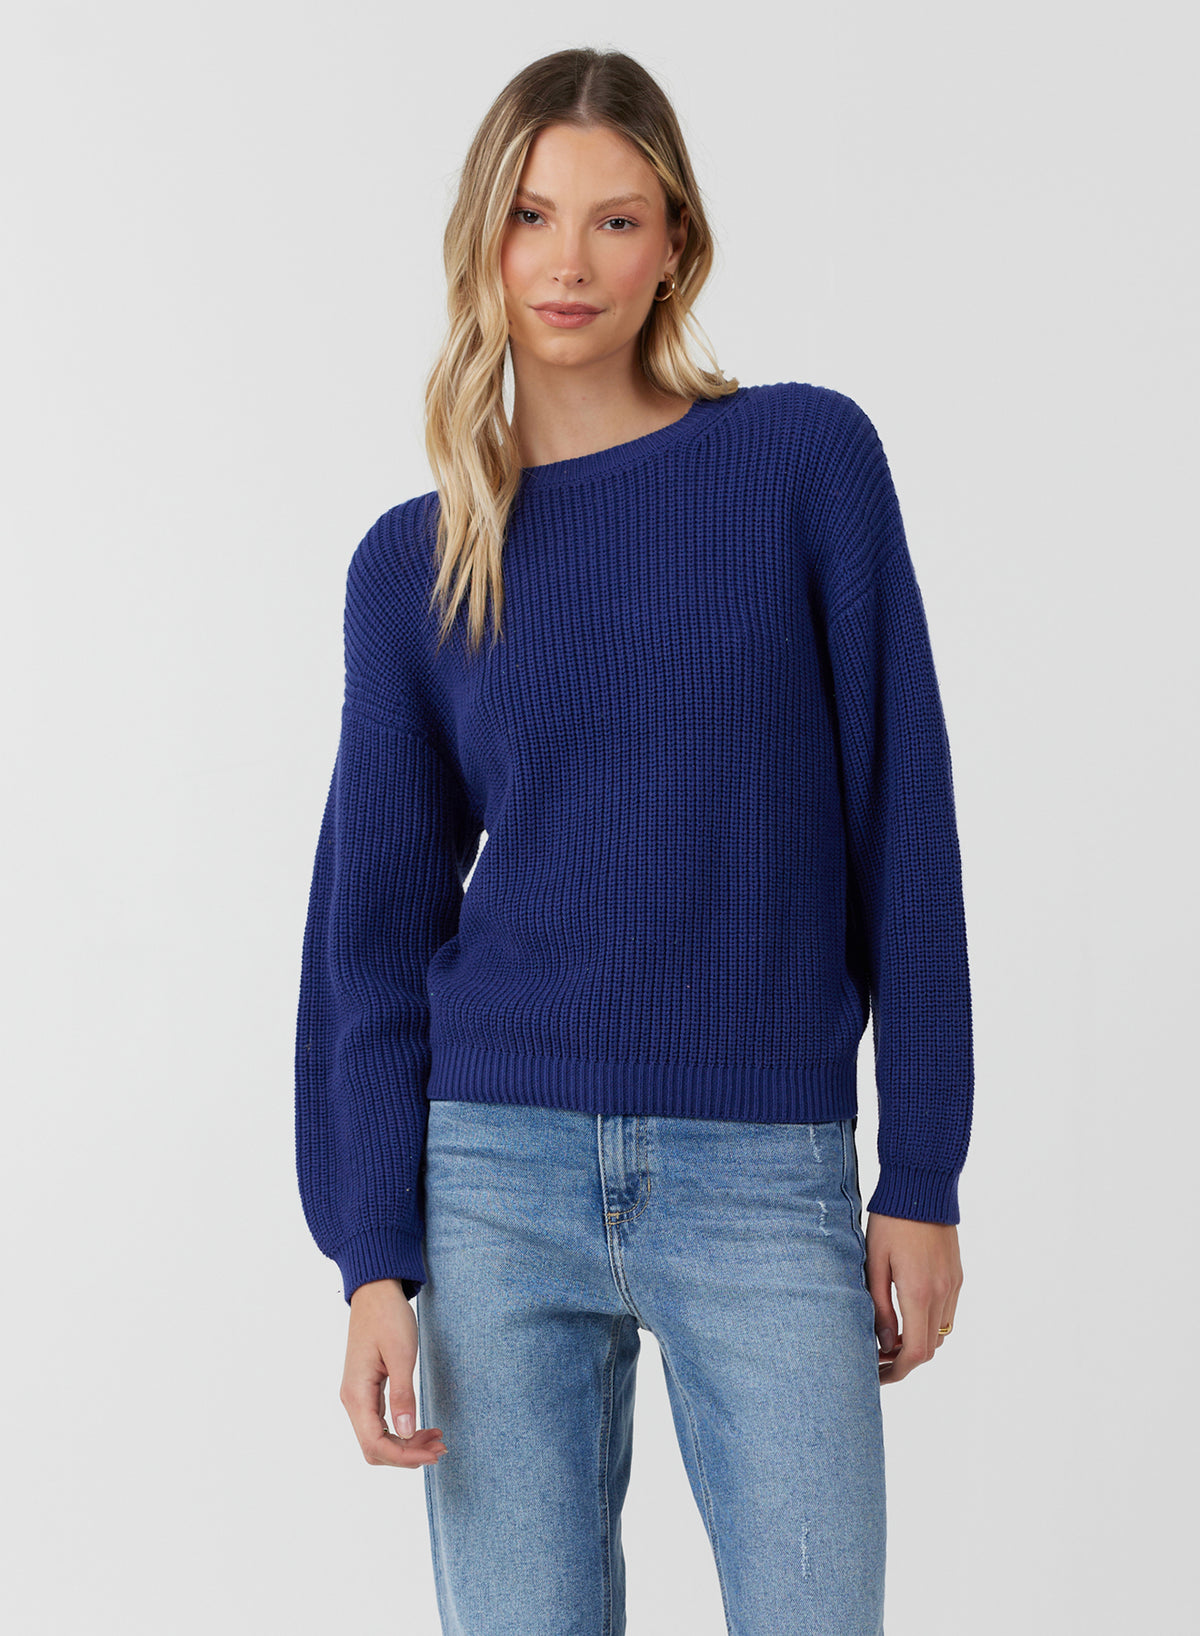 Stitches + Stripes Murphy Pullover